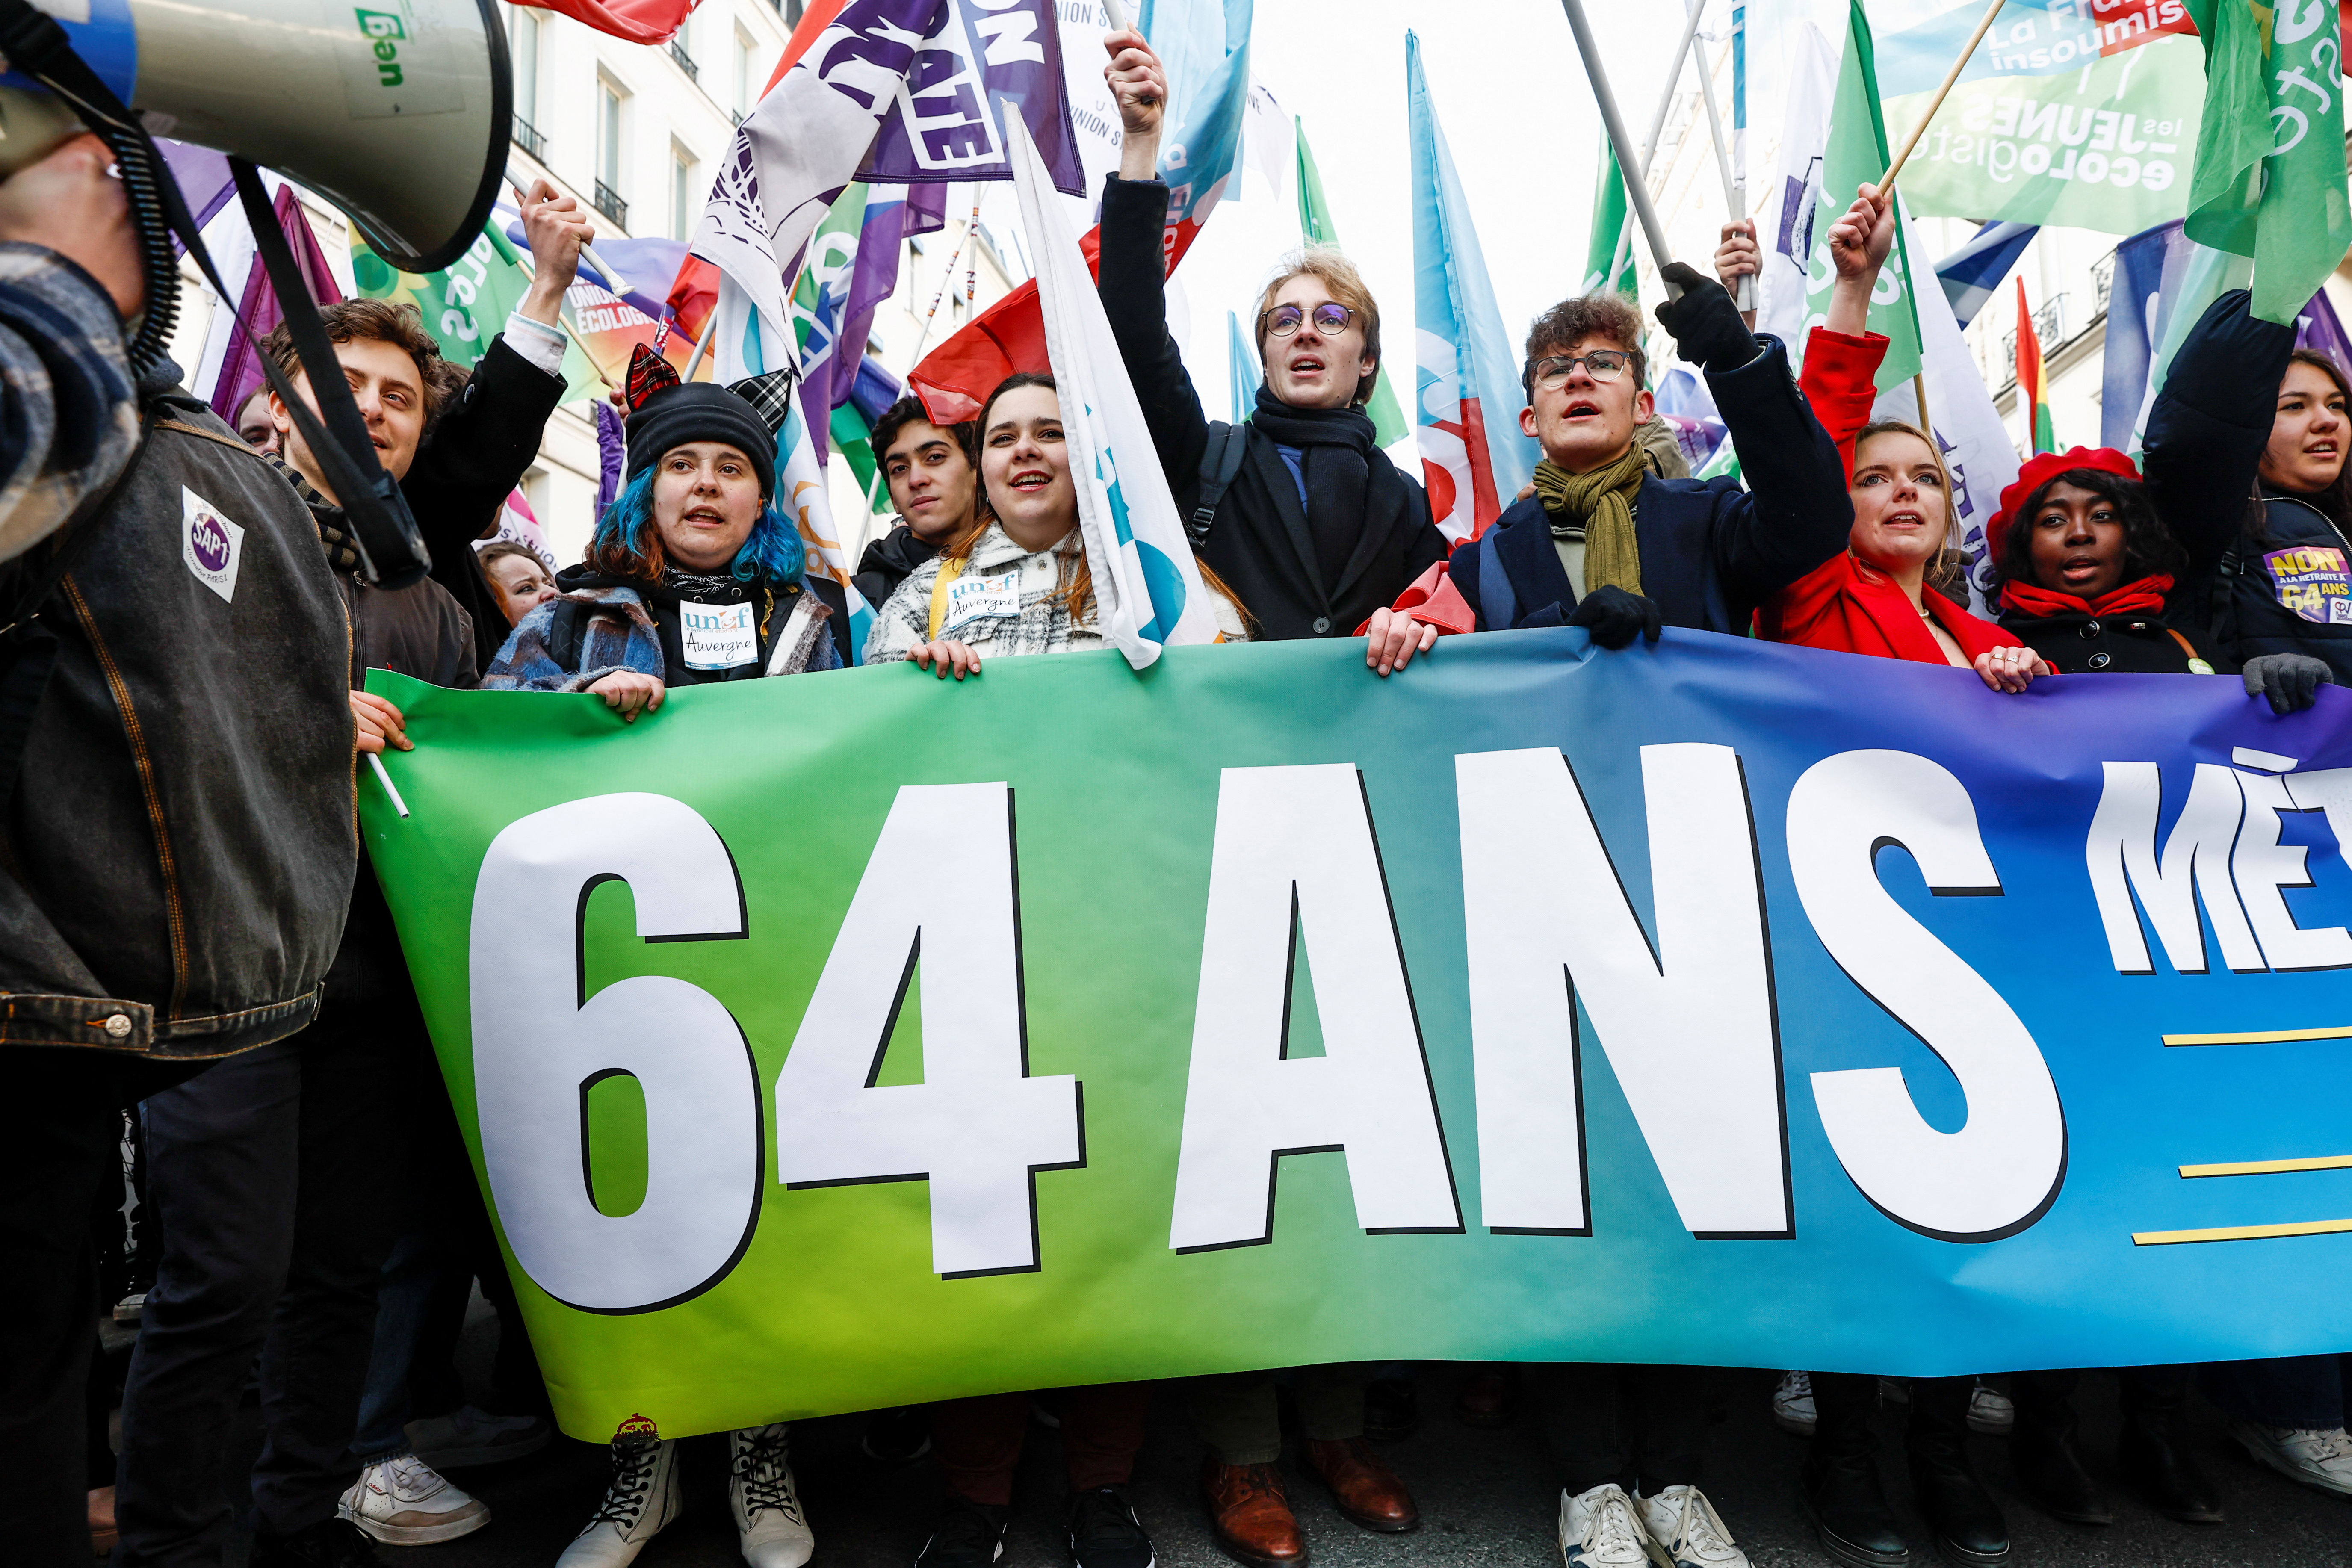 Young people carry a banner that says "No to retirement at 64 years old" during a protest in Paris (Reuters)